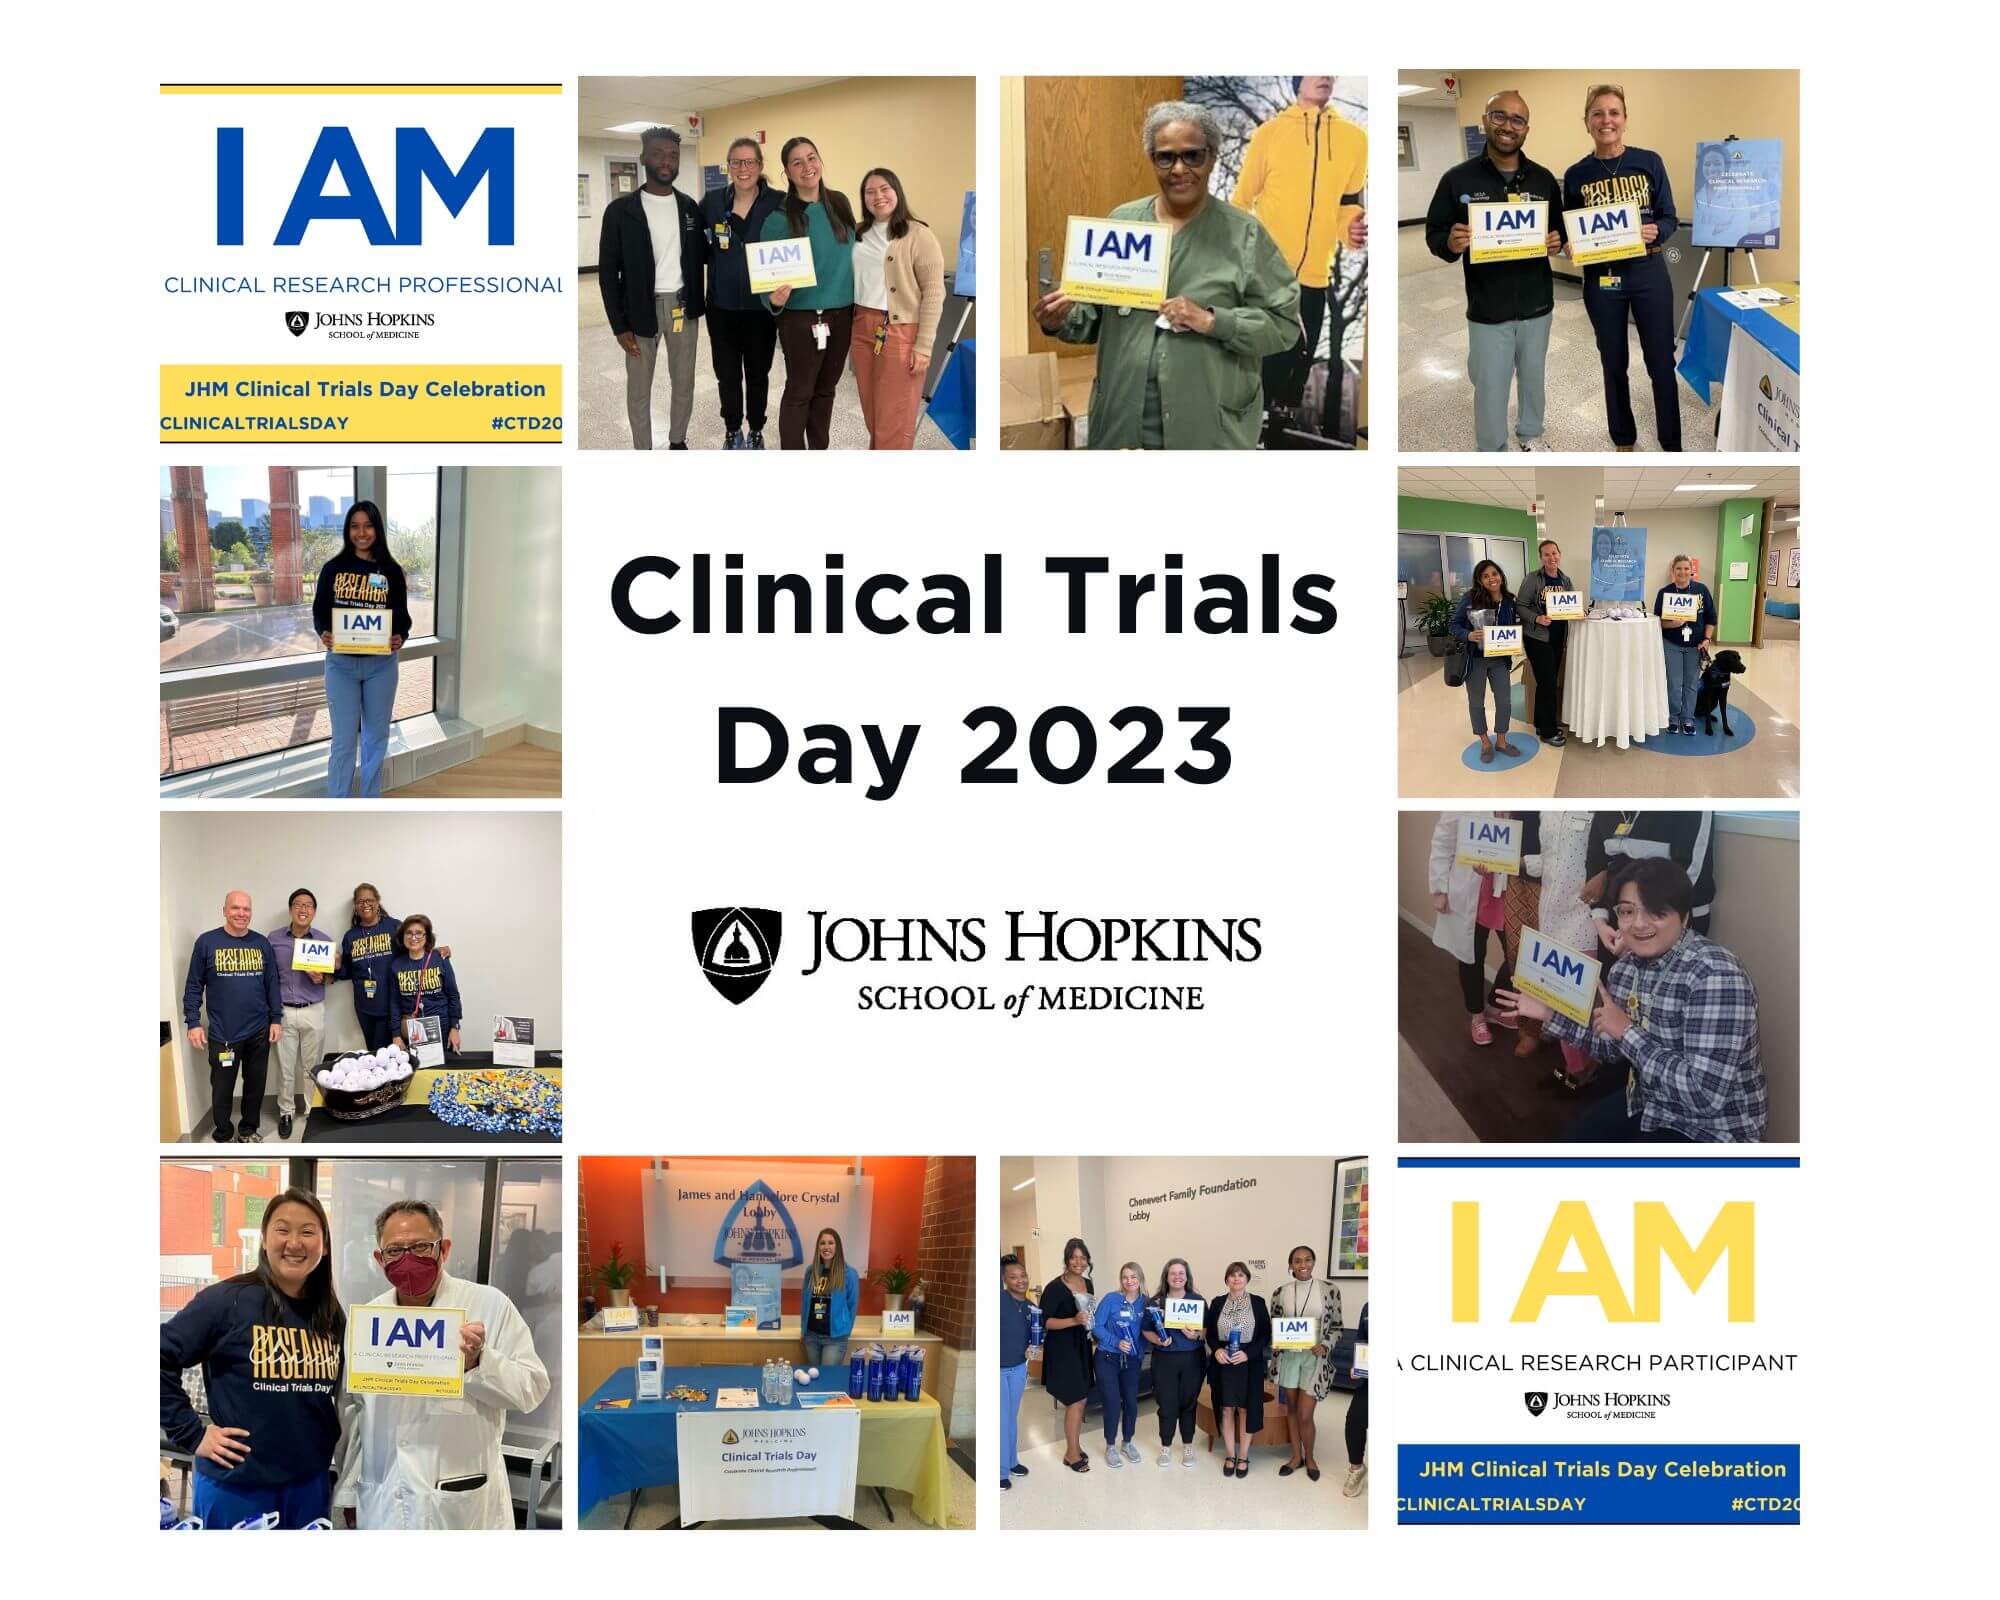 Collage of images from the inaugural Clinical Trials Day